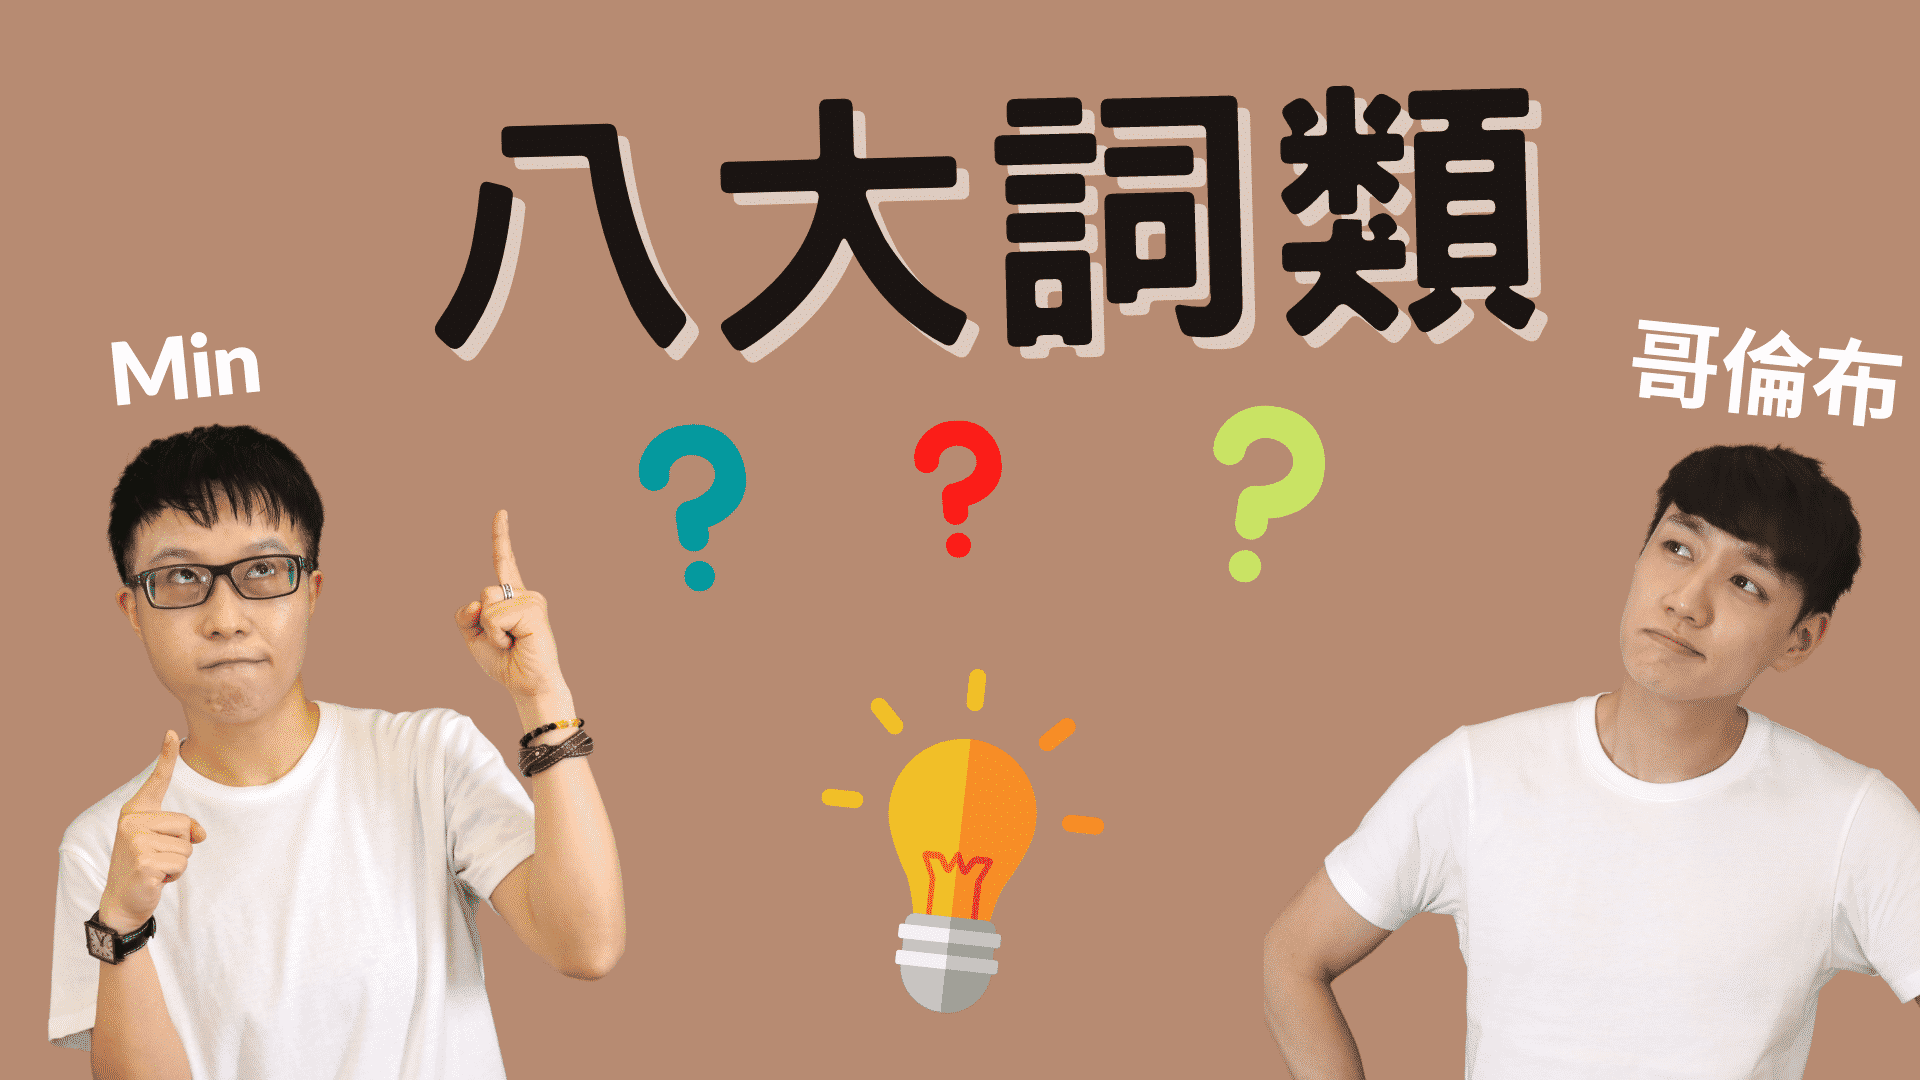 You are currently viewing 八大詞類（Eight Parts of Speech）有哪些？來一次搞懂！